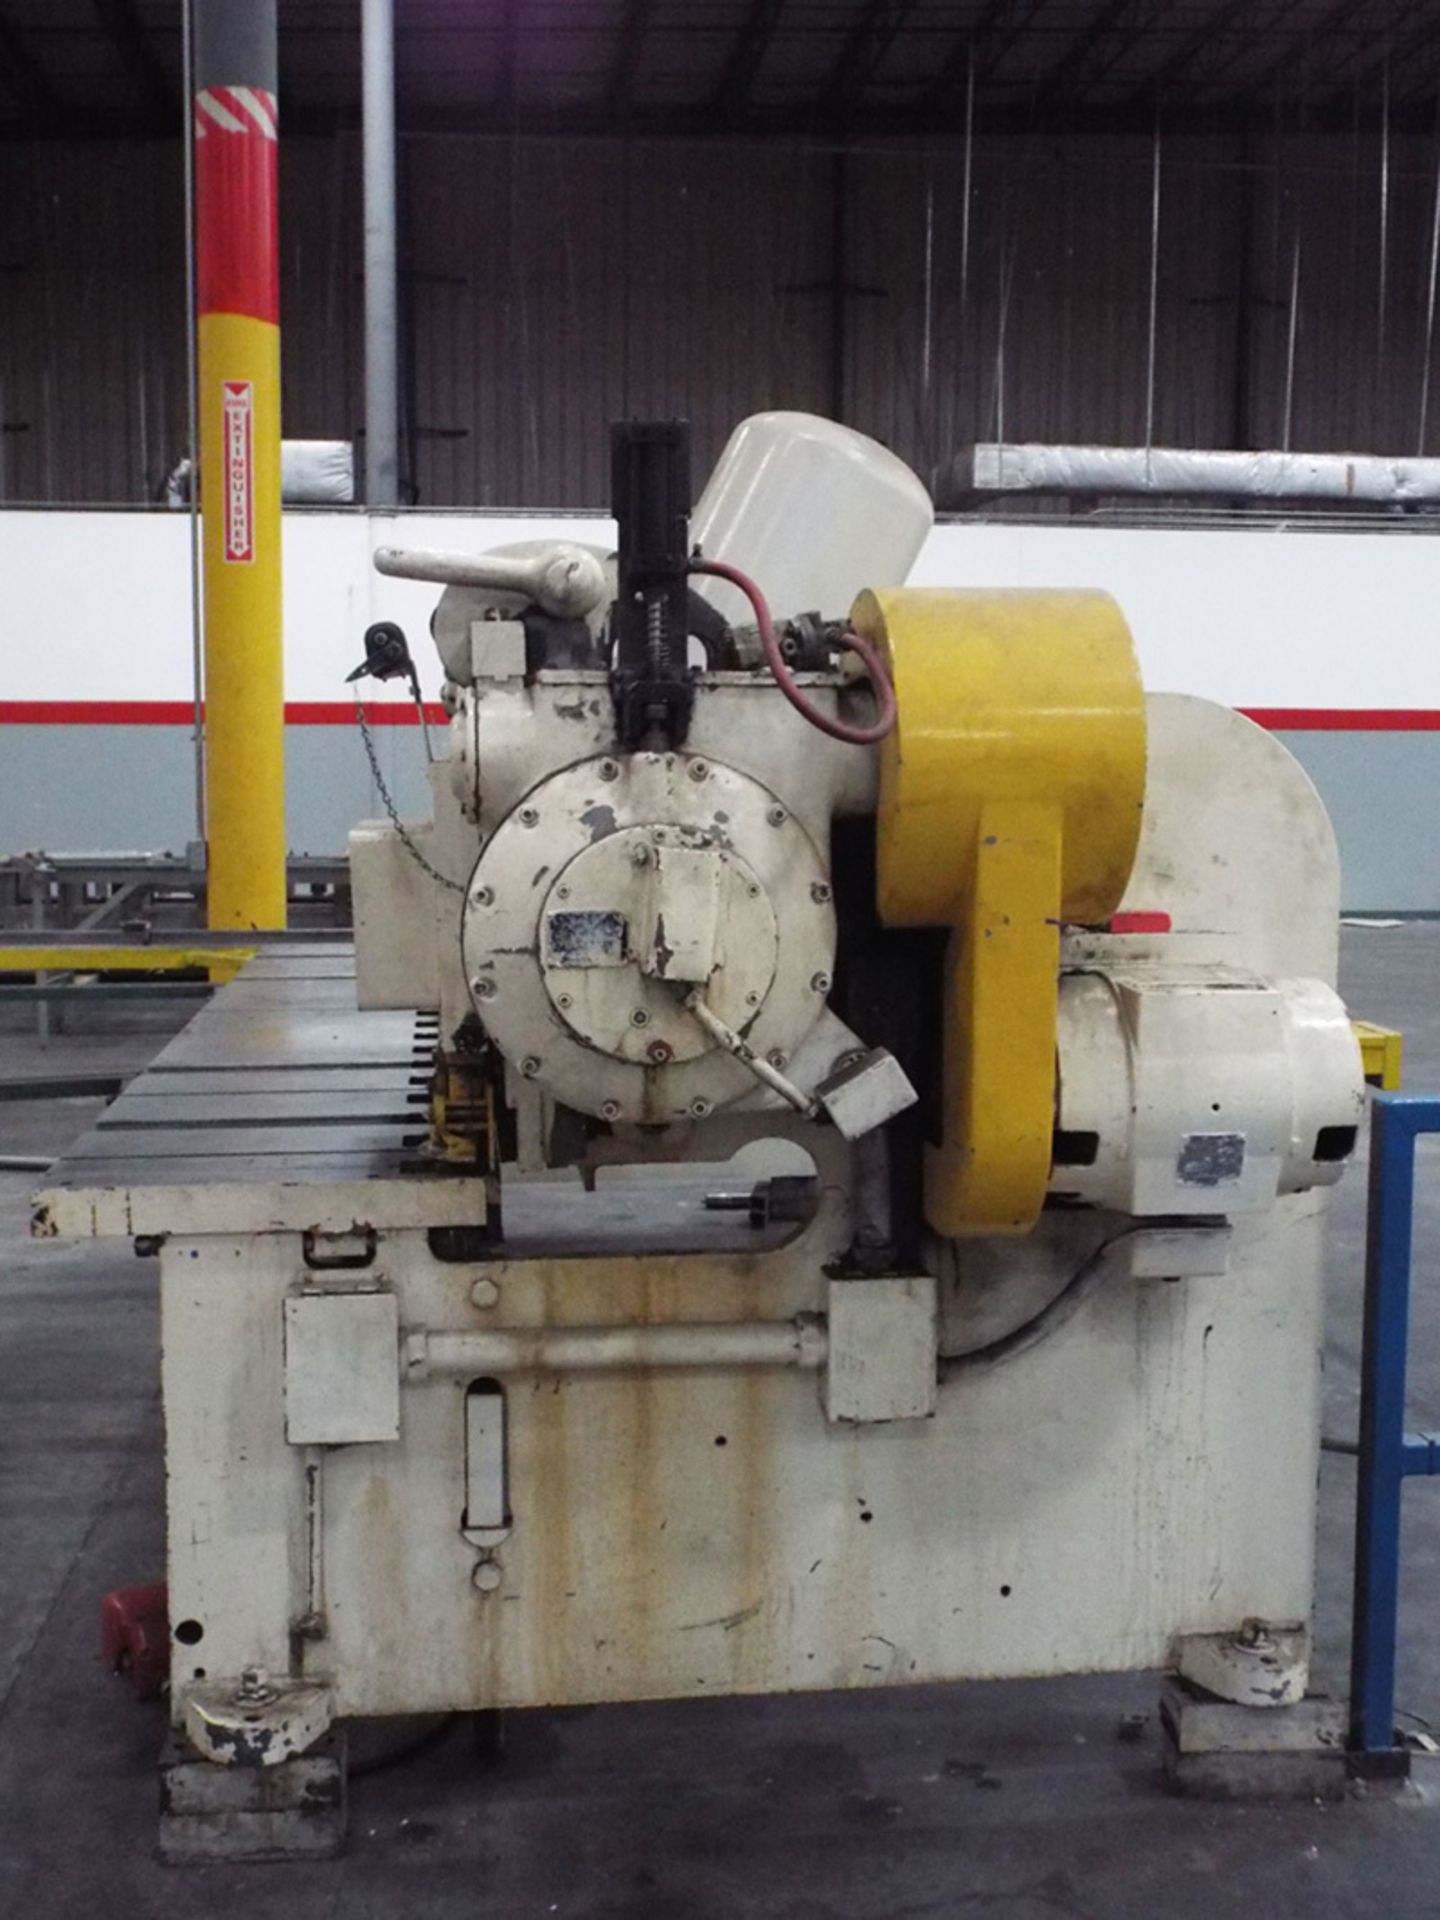 Cincinnati Power Shear, 1/4" x 12', Mdl: 1812, S/N: 36327 (8035P) (Located In Painesville, OH) - Image 3 of 7